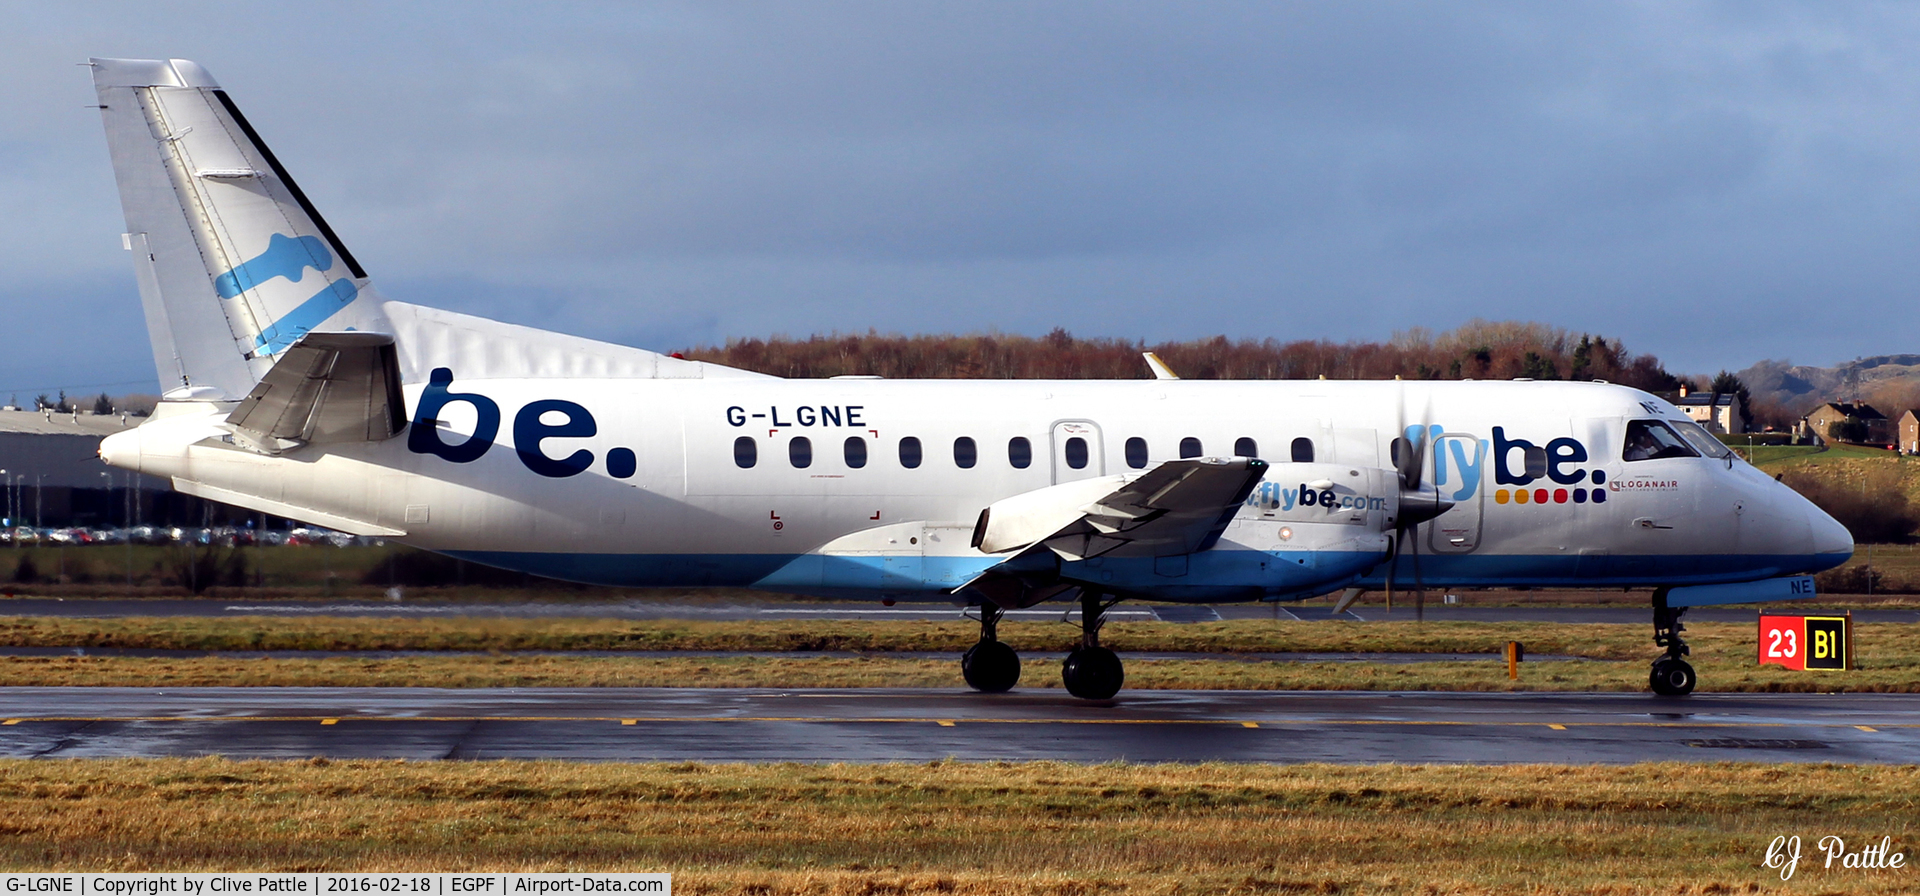 G-LGNE, 1989 Saab SF340B C/N 340B-172, Taxi for departure from Glasgow EGPF